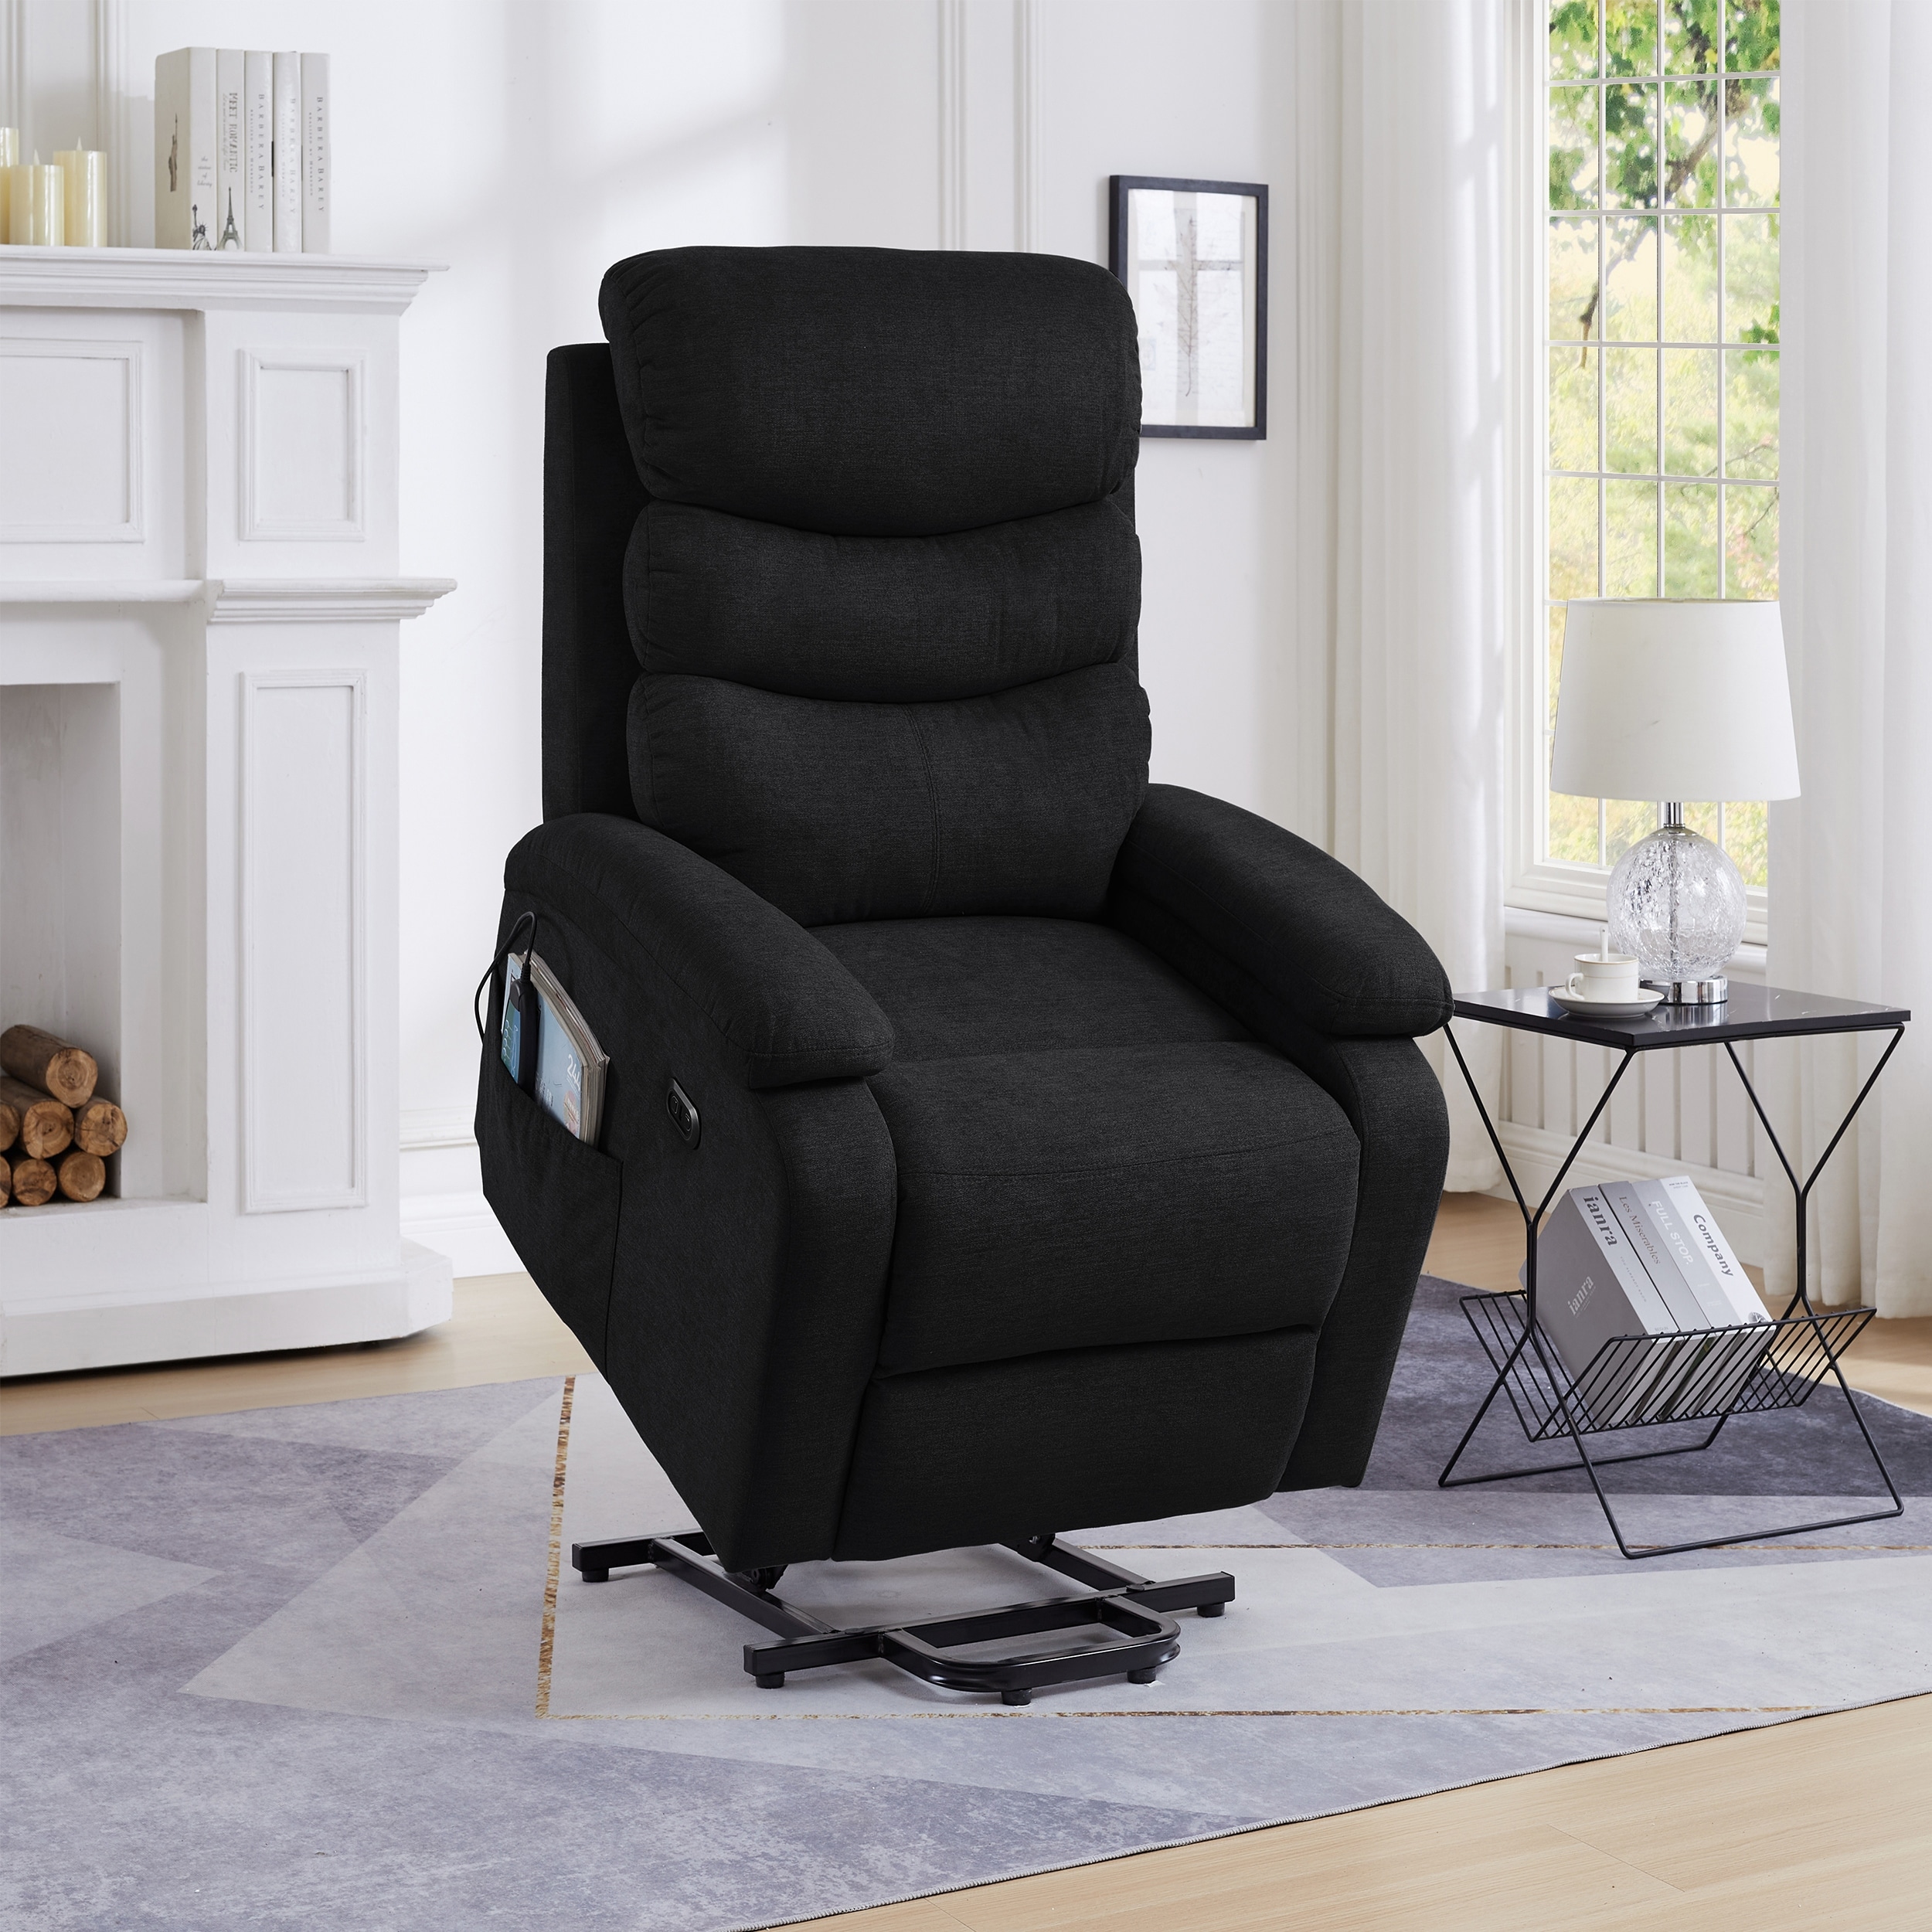 https://ak1.ostkcdn.com/images/products/is/images/direct/7ac9f87e4ca5491906c3ec49329f62028b1b0ee5/Dark-Grey-Linen-Power-Lift-Recliner-Chair-with-Vibration-and-Heating.jpg